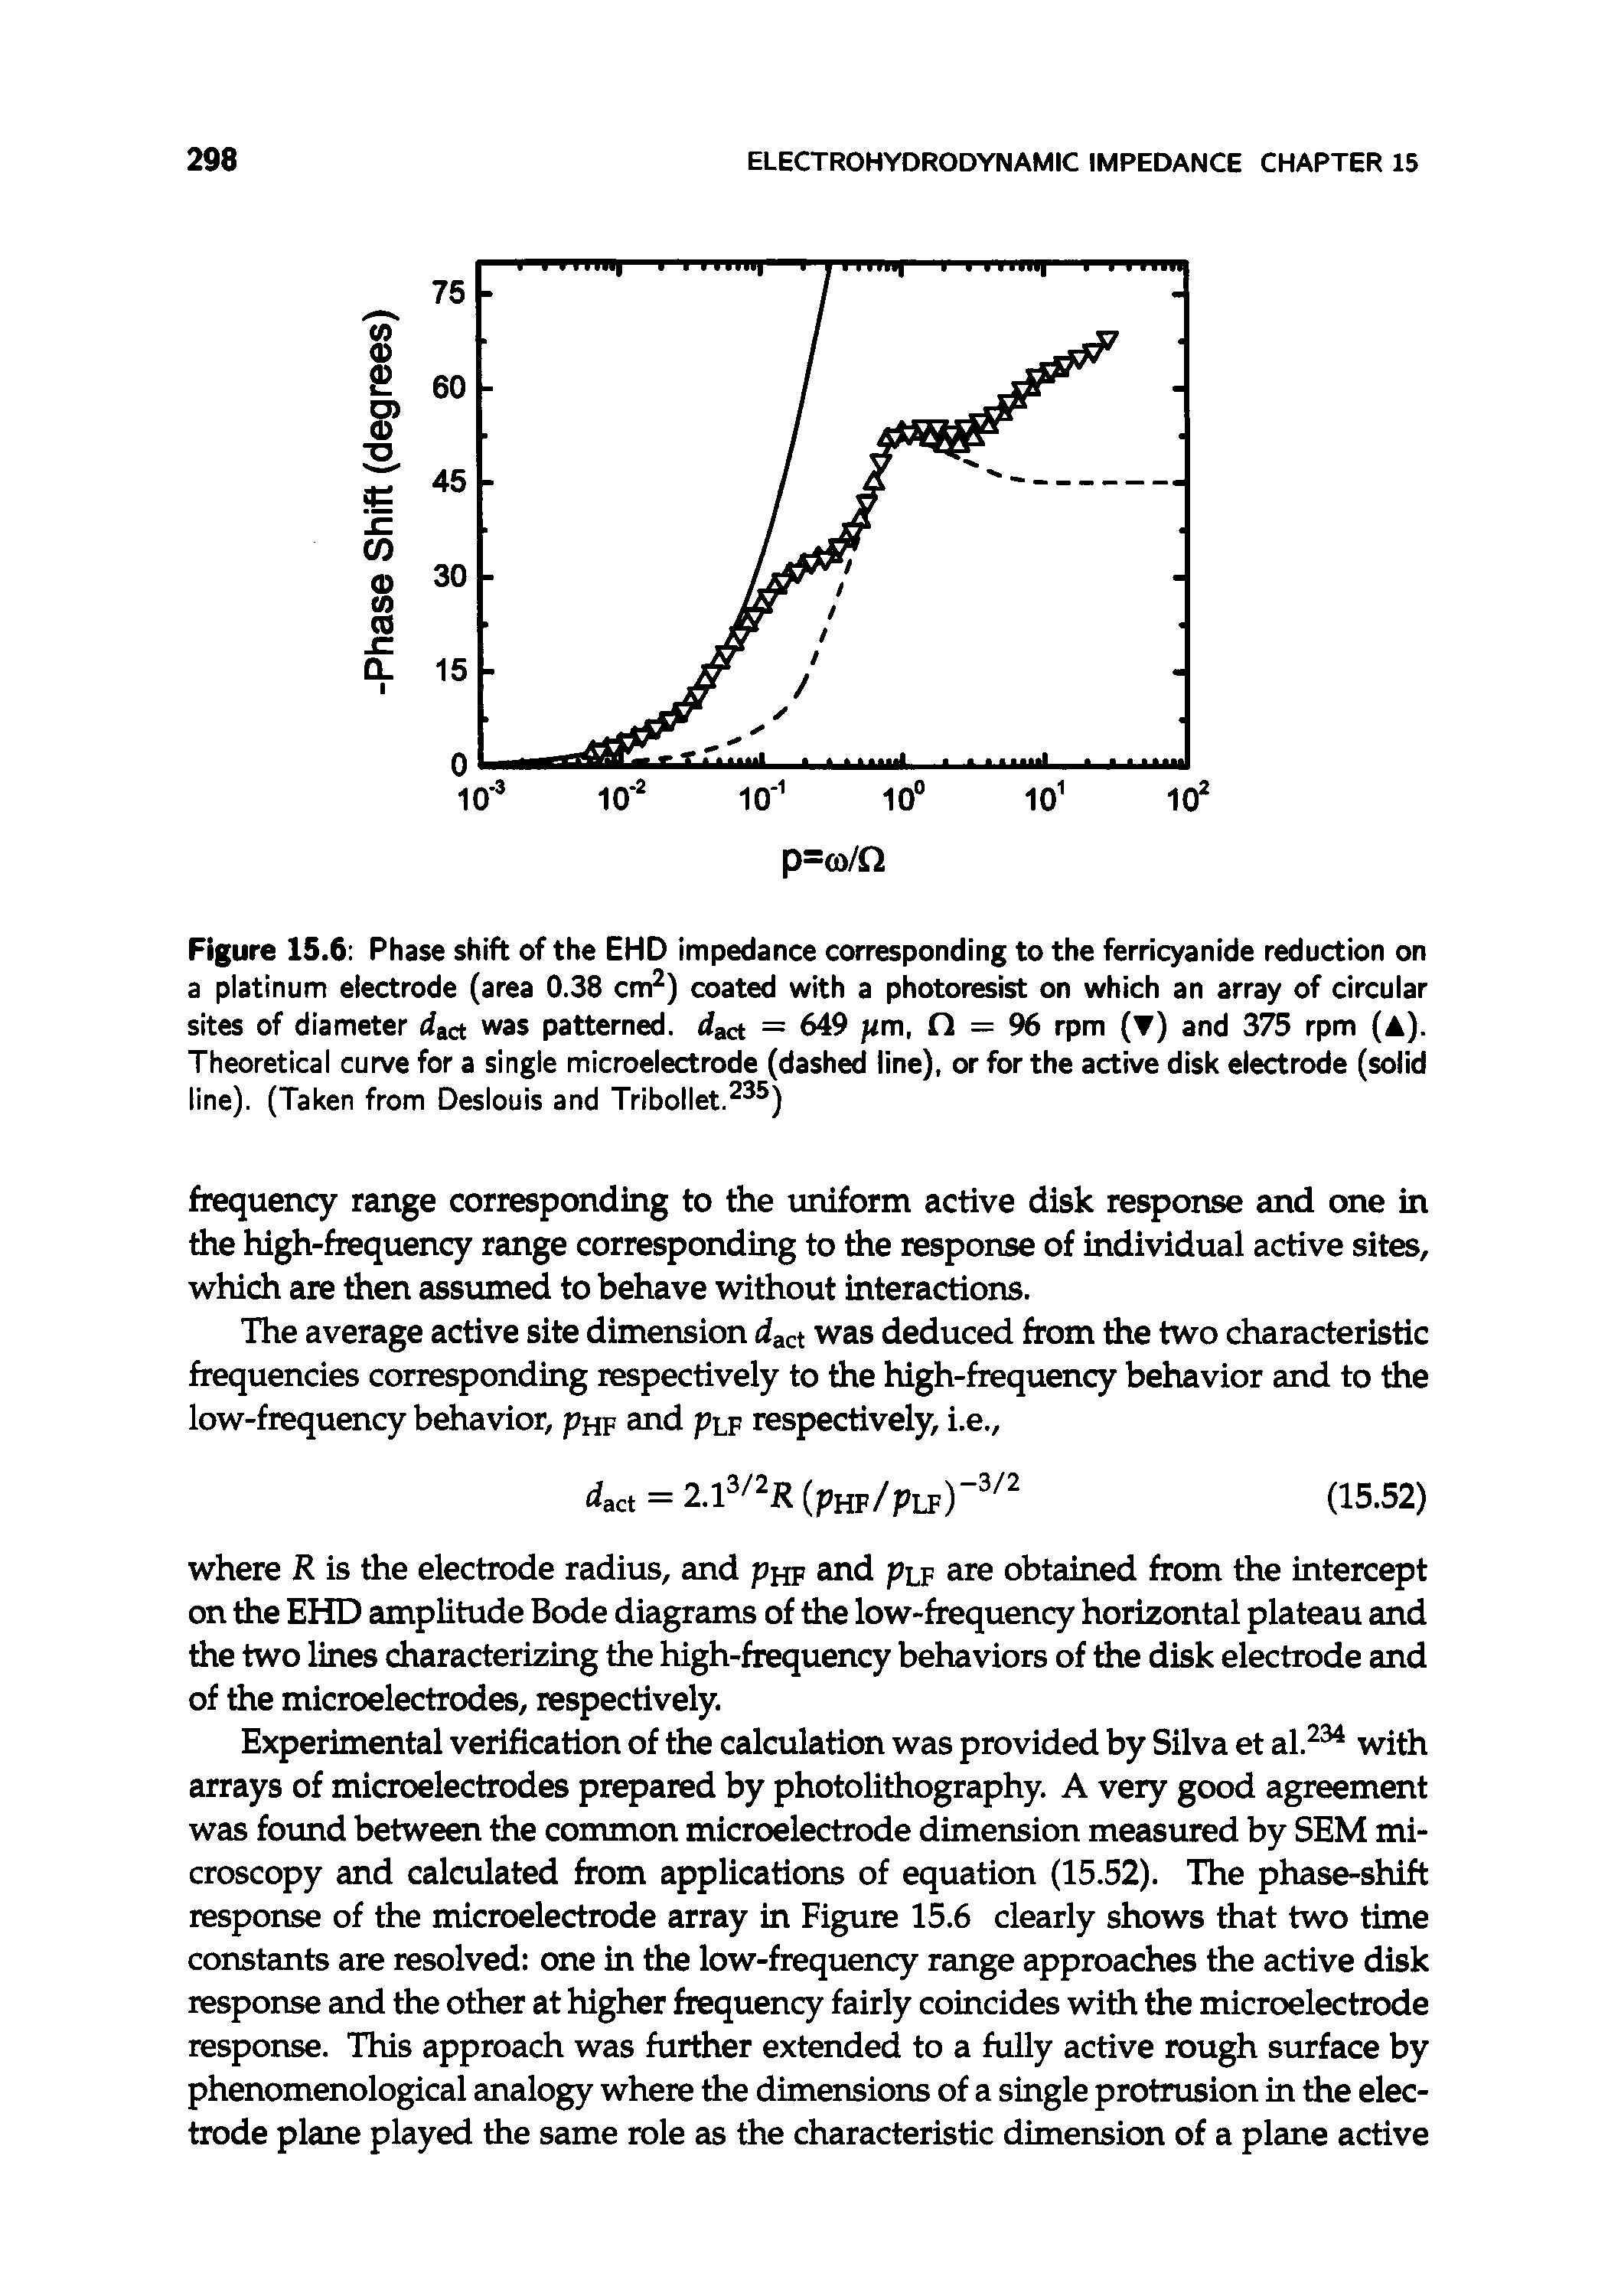 Figure 15.6 Phase shift of the EHD impedance corresponding to the ferricyanide reduction on a platinum electrode (area 0.38 cm ) coated with a photoresist on which an array of circular sites of diameter dact was patterned, dact = 649 fim, Ci — 96 rpm ( ) and 375 rpm (A). Theoretical curve for a single microelectrode (dashed line), or for the active disk electrode (solid line). (Taken from Deslouis and Tribollet. )...